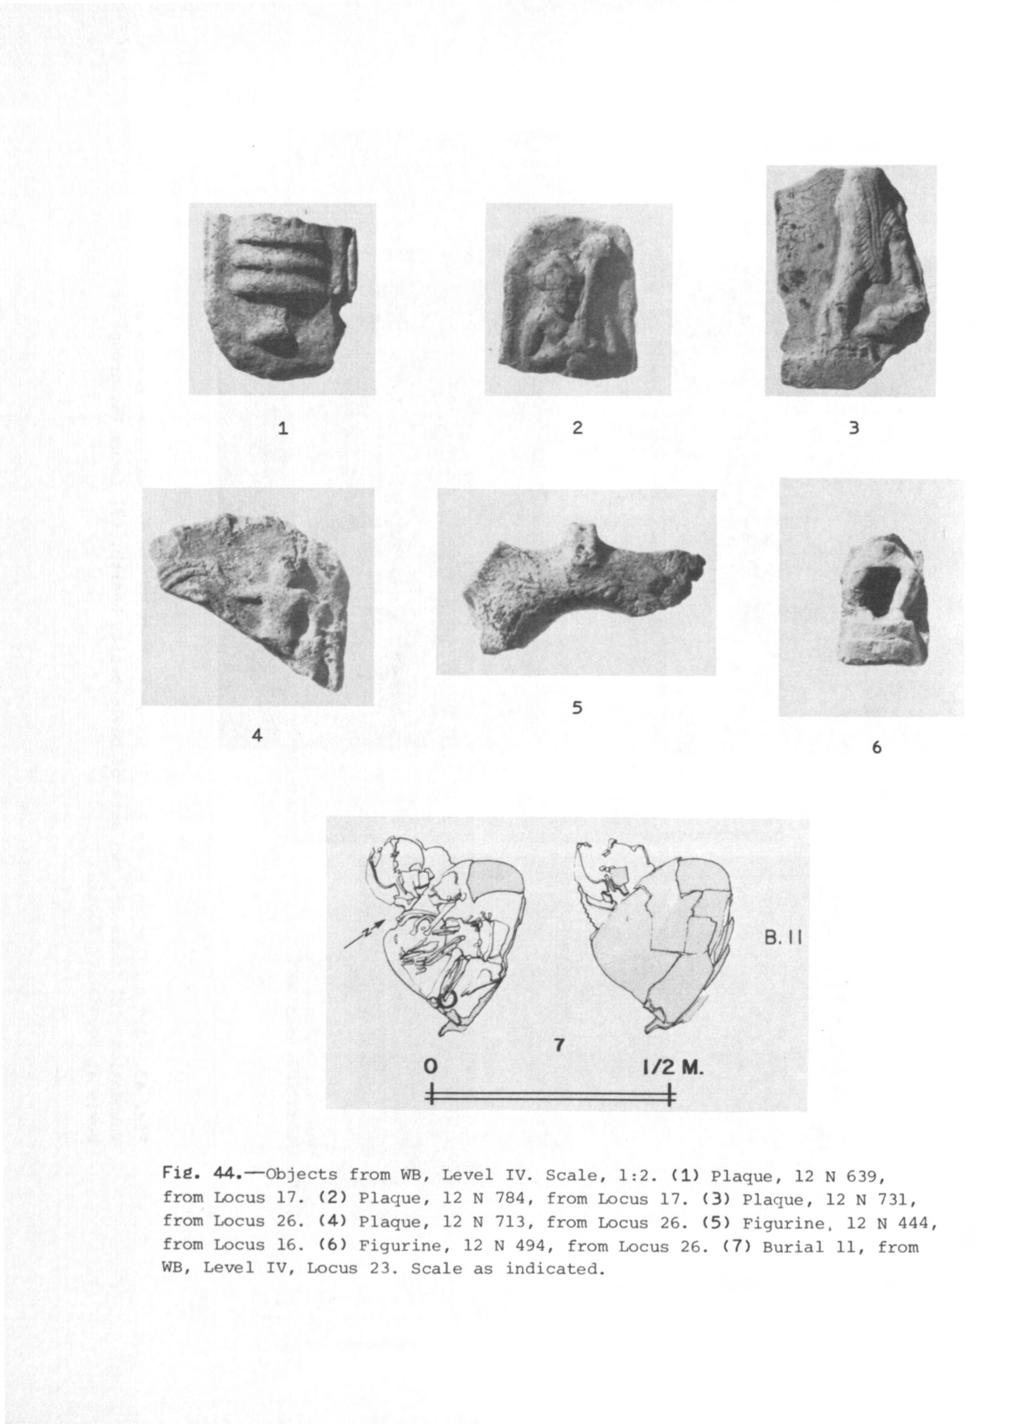 B. II 1/2 M. I Fig. 44.-Objects from WB, Level IV. Scale, 1:2. (1) Plaque, 12 N 639, from Locus 17. (2) Plaque, 12 N 784, from Locus 17. (3) Plaque, 12 N 731, from Locus 26.